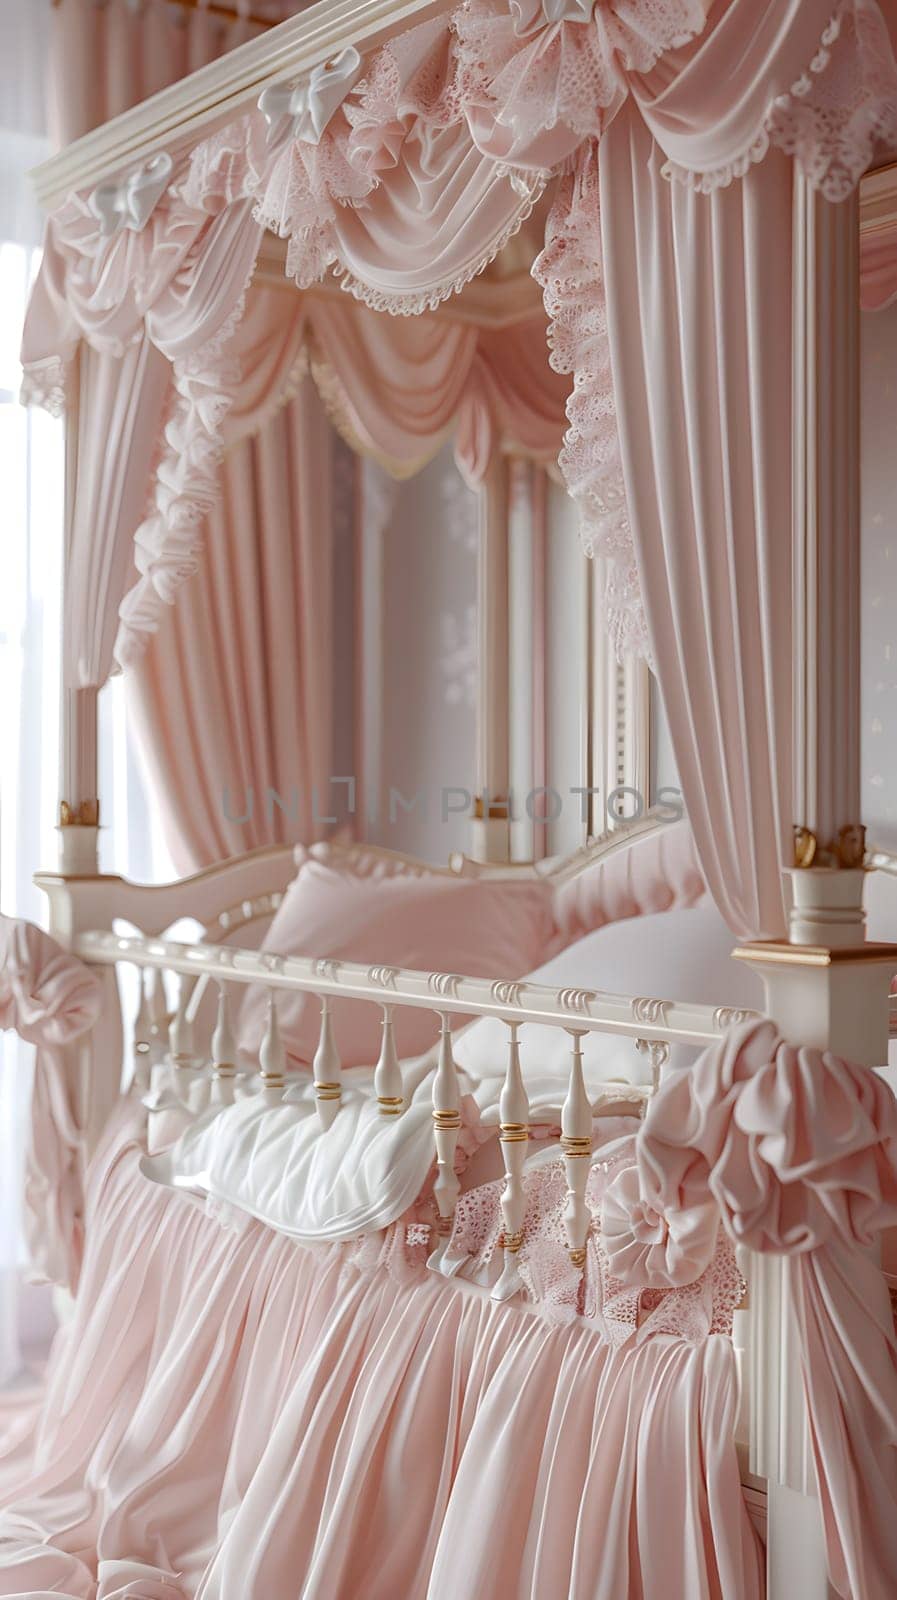 A bed with a canopy and pink curtains in a room adds a touch of elegance and charm to the space. The hardwood frame and artistic design make it a focal point